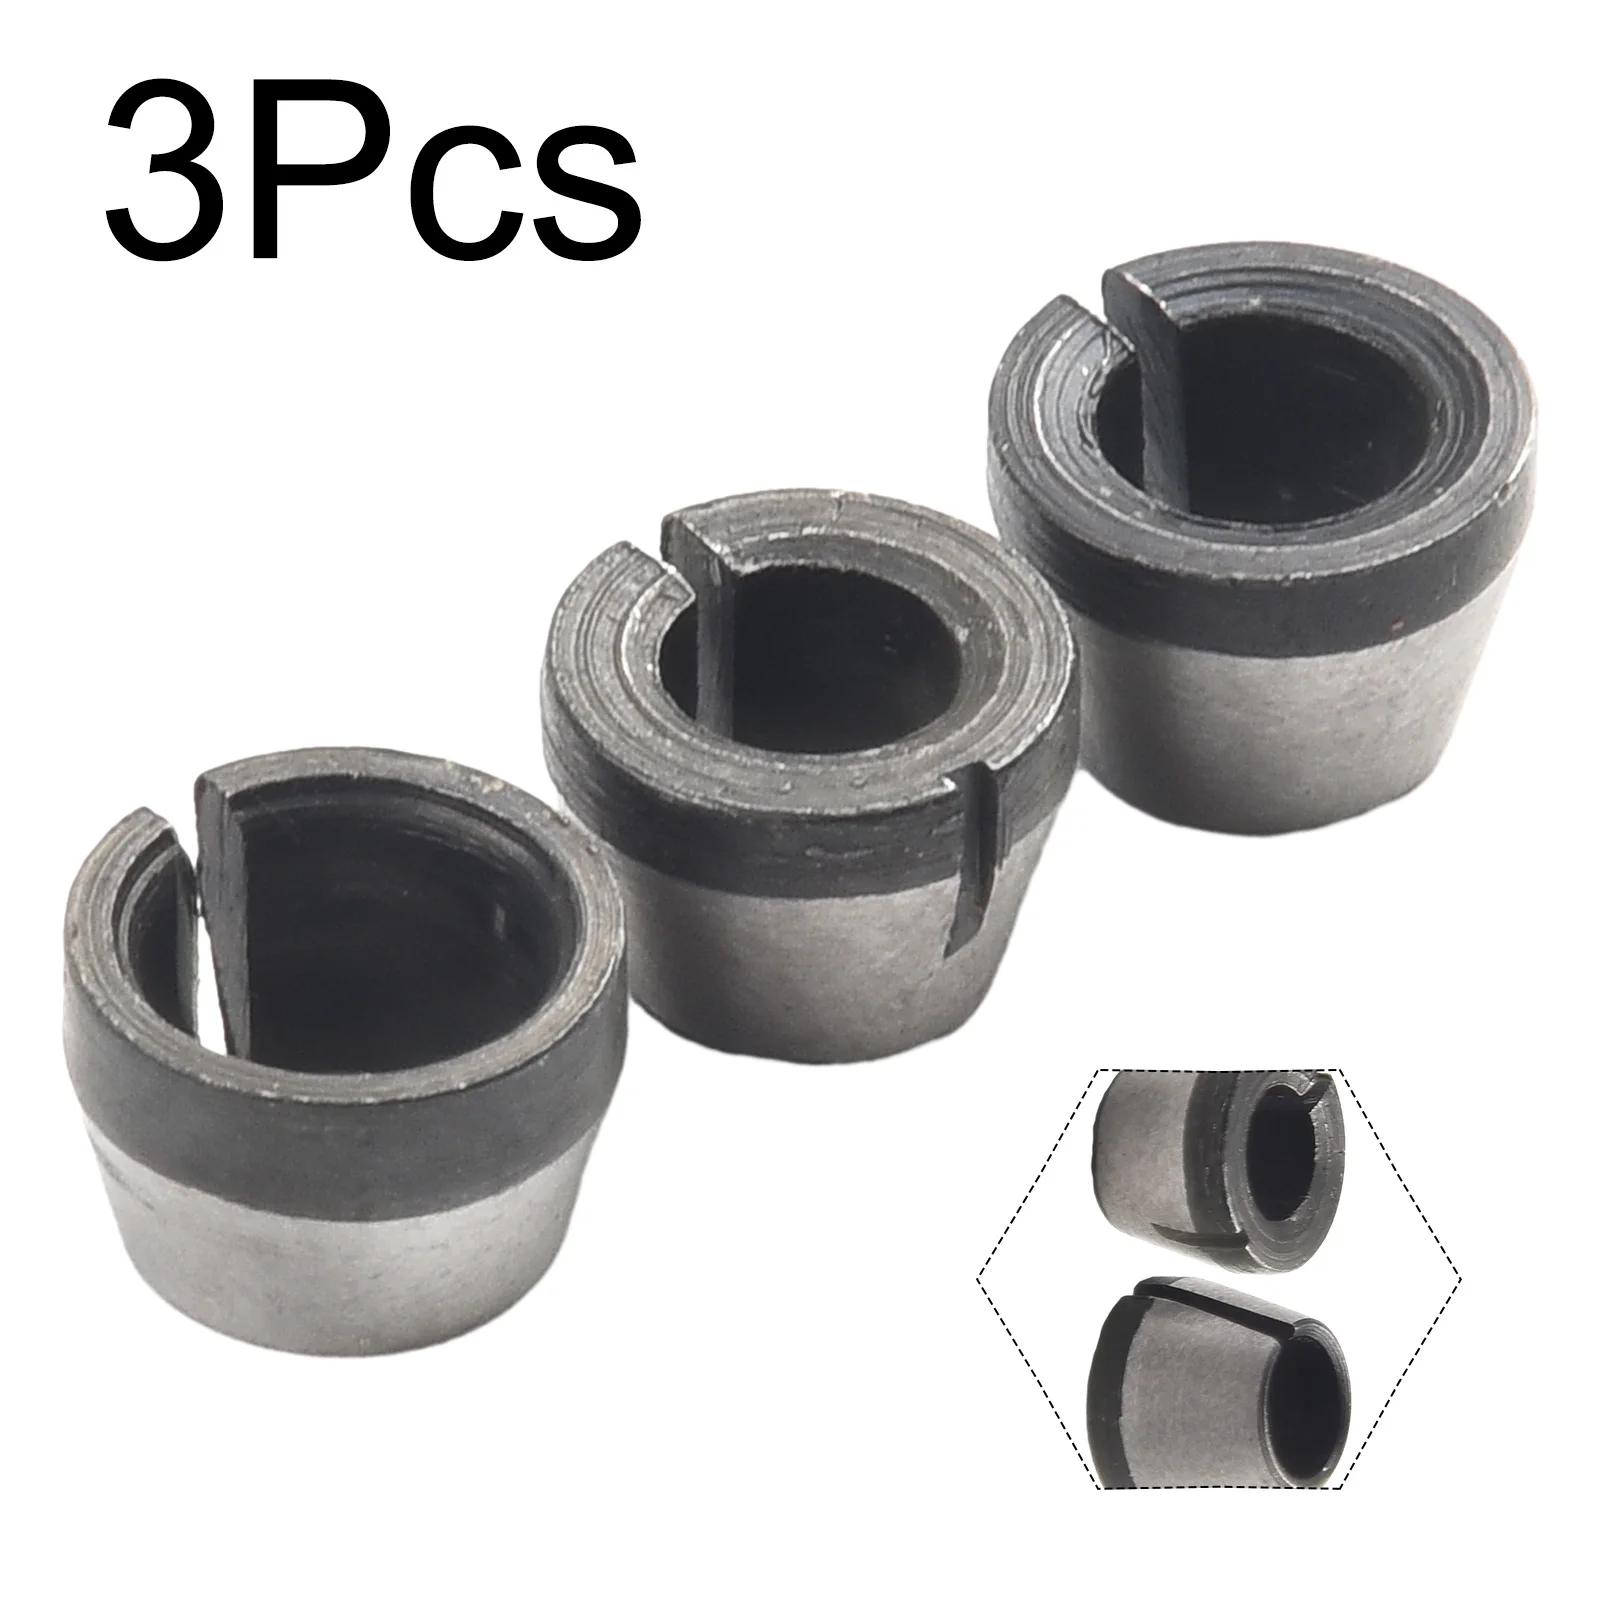 3PCS Collet Chuck High Precision Adapter Engraving Trimming Machine Electric Router Milling Cutter Accessories woodworking lift flip engraving machine electric wood milling trimming machine router insert plate for woodworking work bench